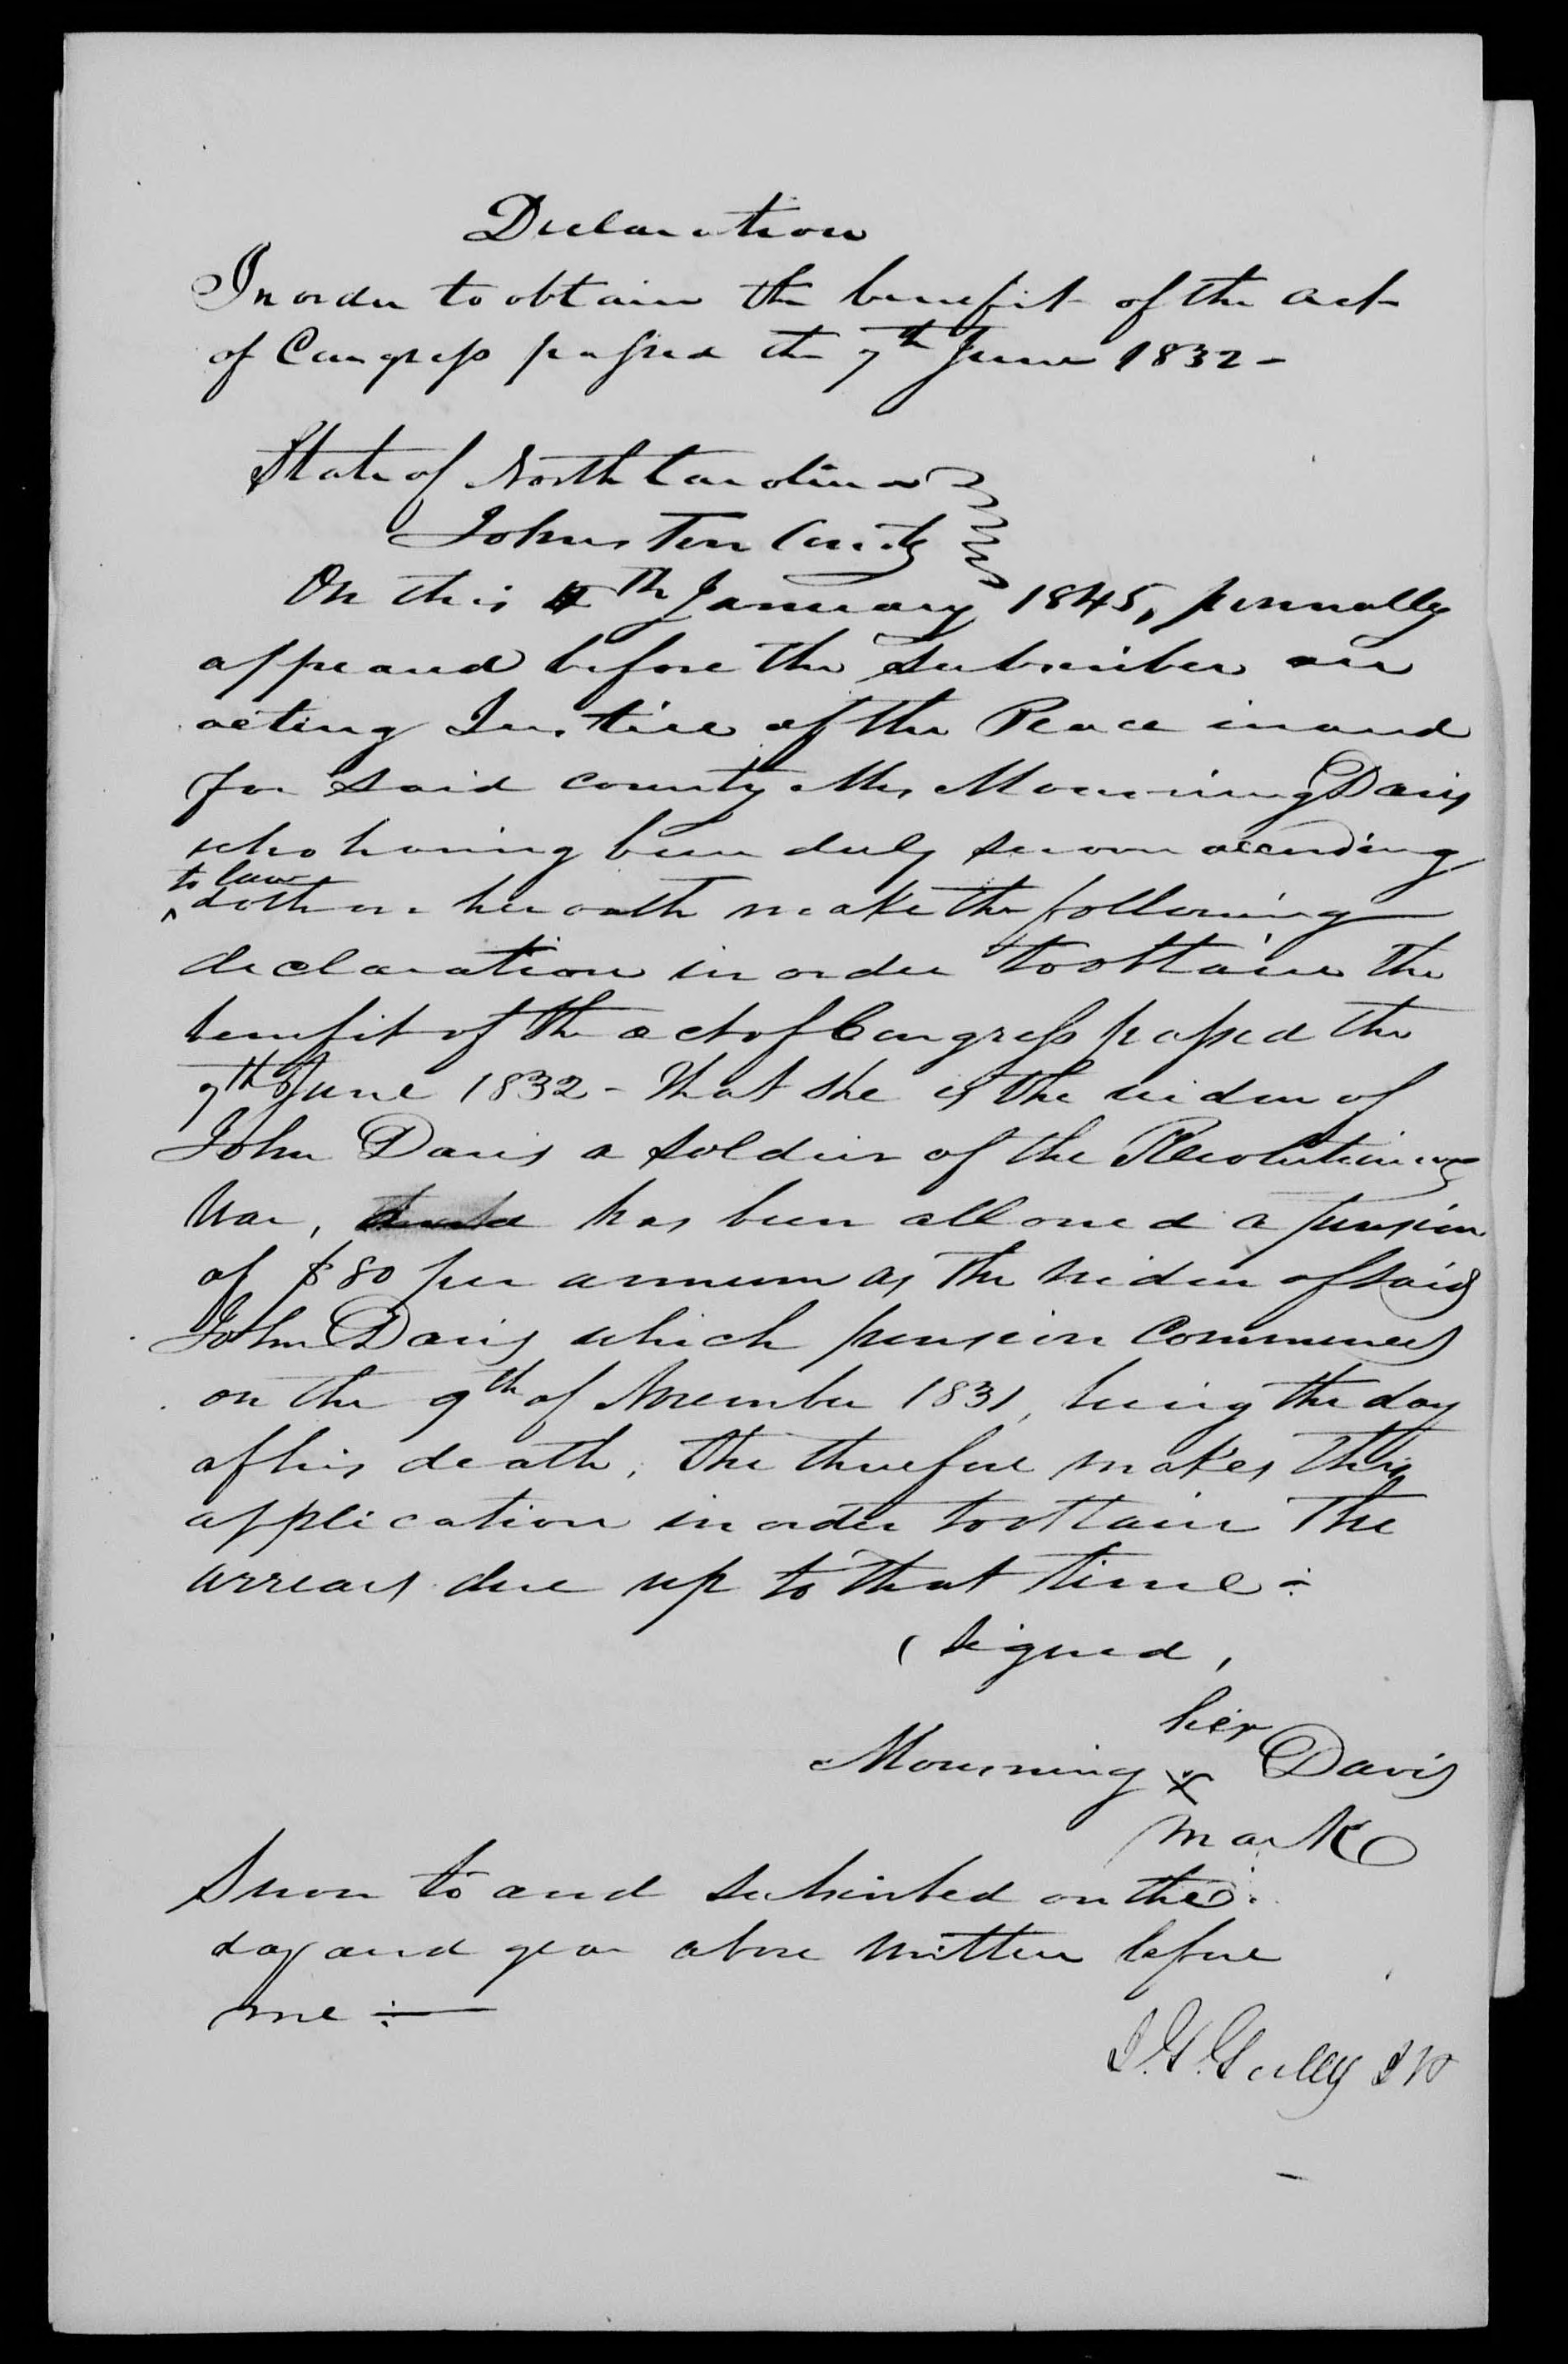 Declaration for receiving a widow's pension by Mourning Davis, 4 January 1845, page 1